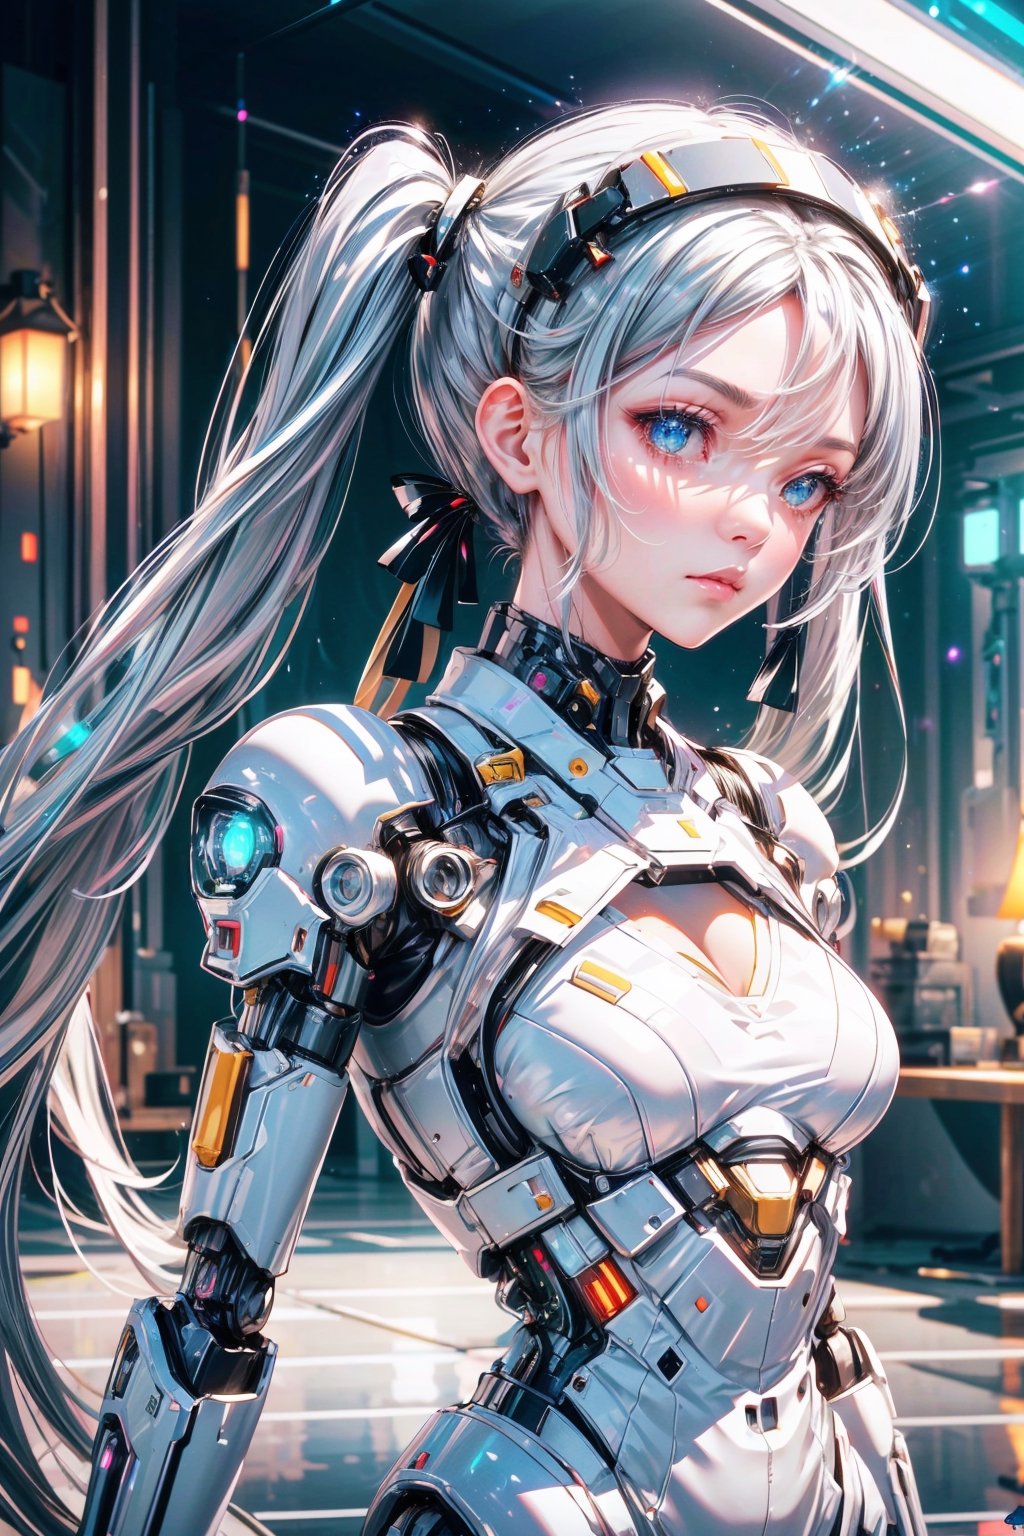 ((high resolution)), ((UHD)), ((incredibly absurdres)), break. ((One android girl)), break. ((sliver twintail hair:1.5)), ((upper body:1.5)), ((looking at camera:1.2)), break. ((in the cyberstyle city)), ((slender boby)), ((intricate internal structure)), ((brighten parts:1.5)), break. ((extremely detailed mecha suit:1.2)), break. (robotic arms), (robotic legs), (robotic hands), ((robotic joint:1.3)), break. Cinematic angle, ultra fine quality, masterpiece, best quality, incredibly absurdres, fhighly detailed, sharp focus, (photon mapping, radiosity, physically-based rendering, automatic white balance), masterpiece, best quality, Mecha body, furure_urban, incredibly absurdres